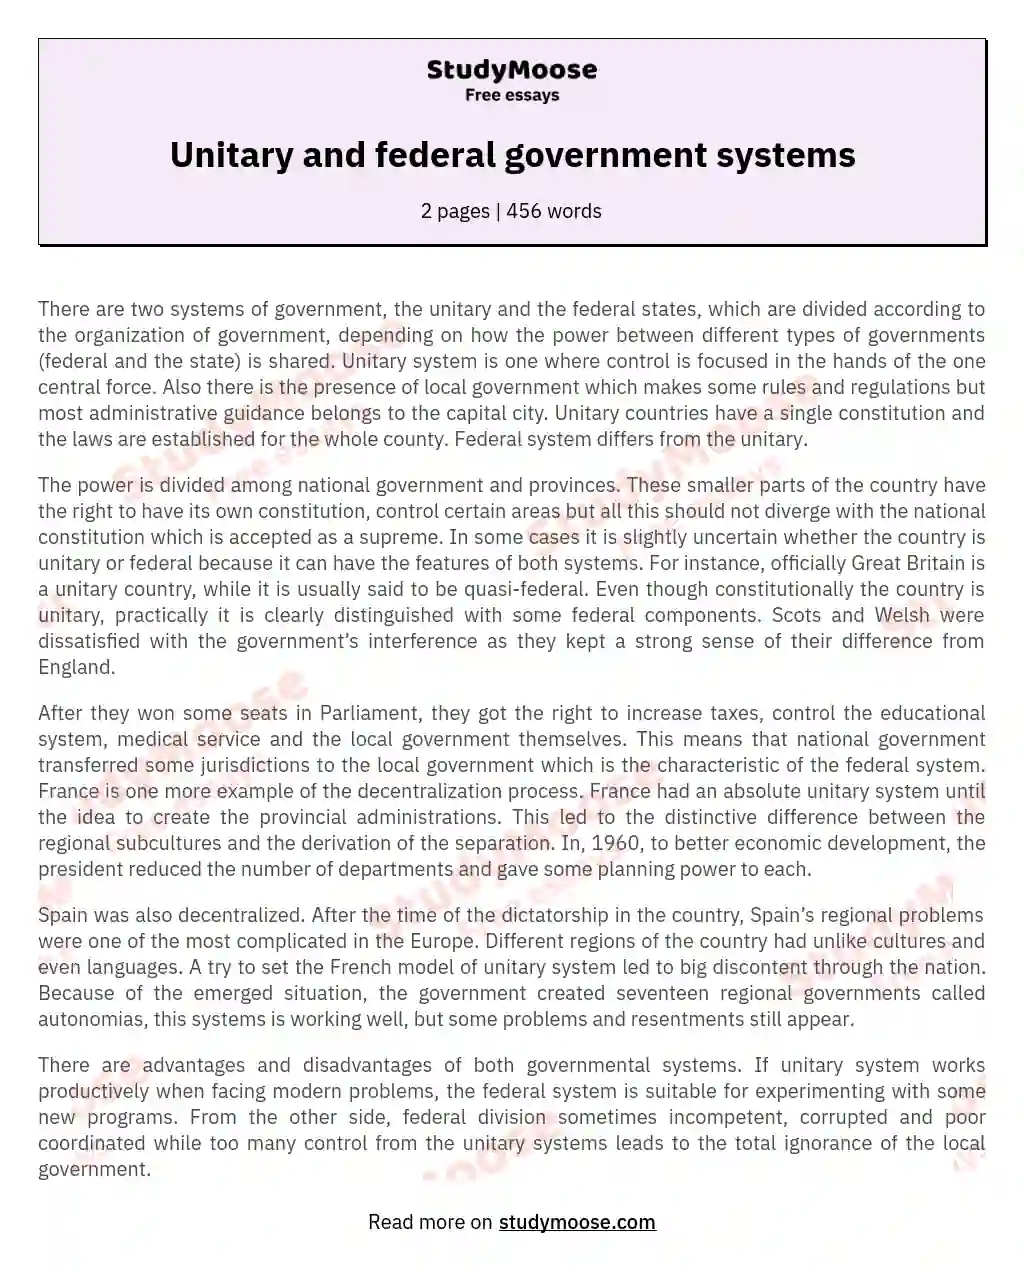 Unitary and federal government systems